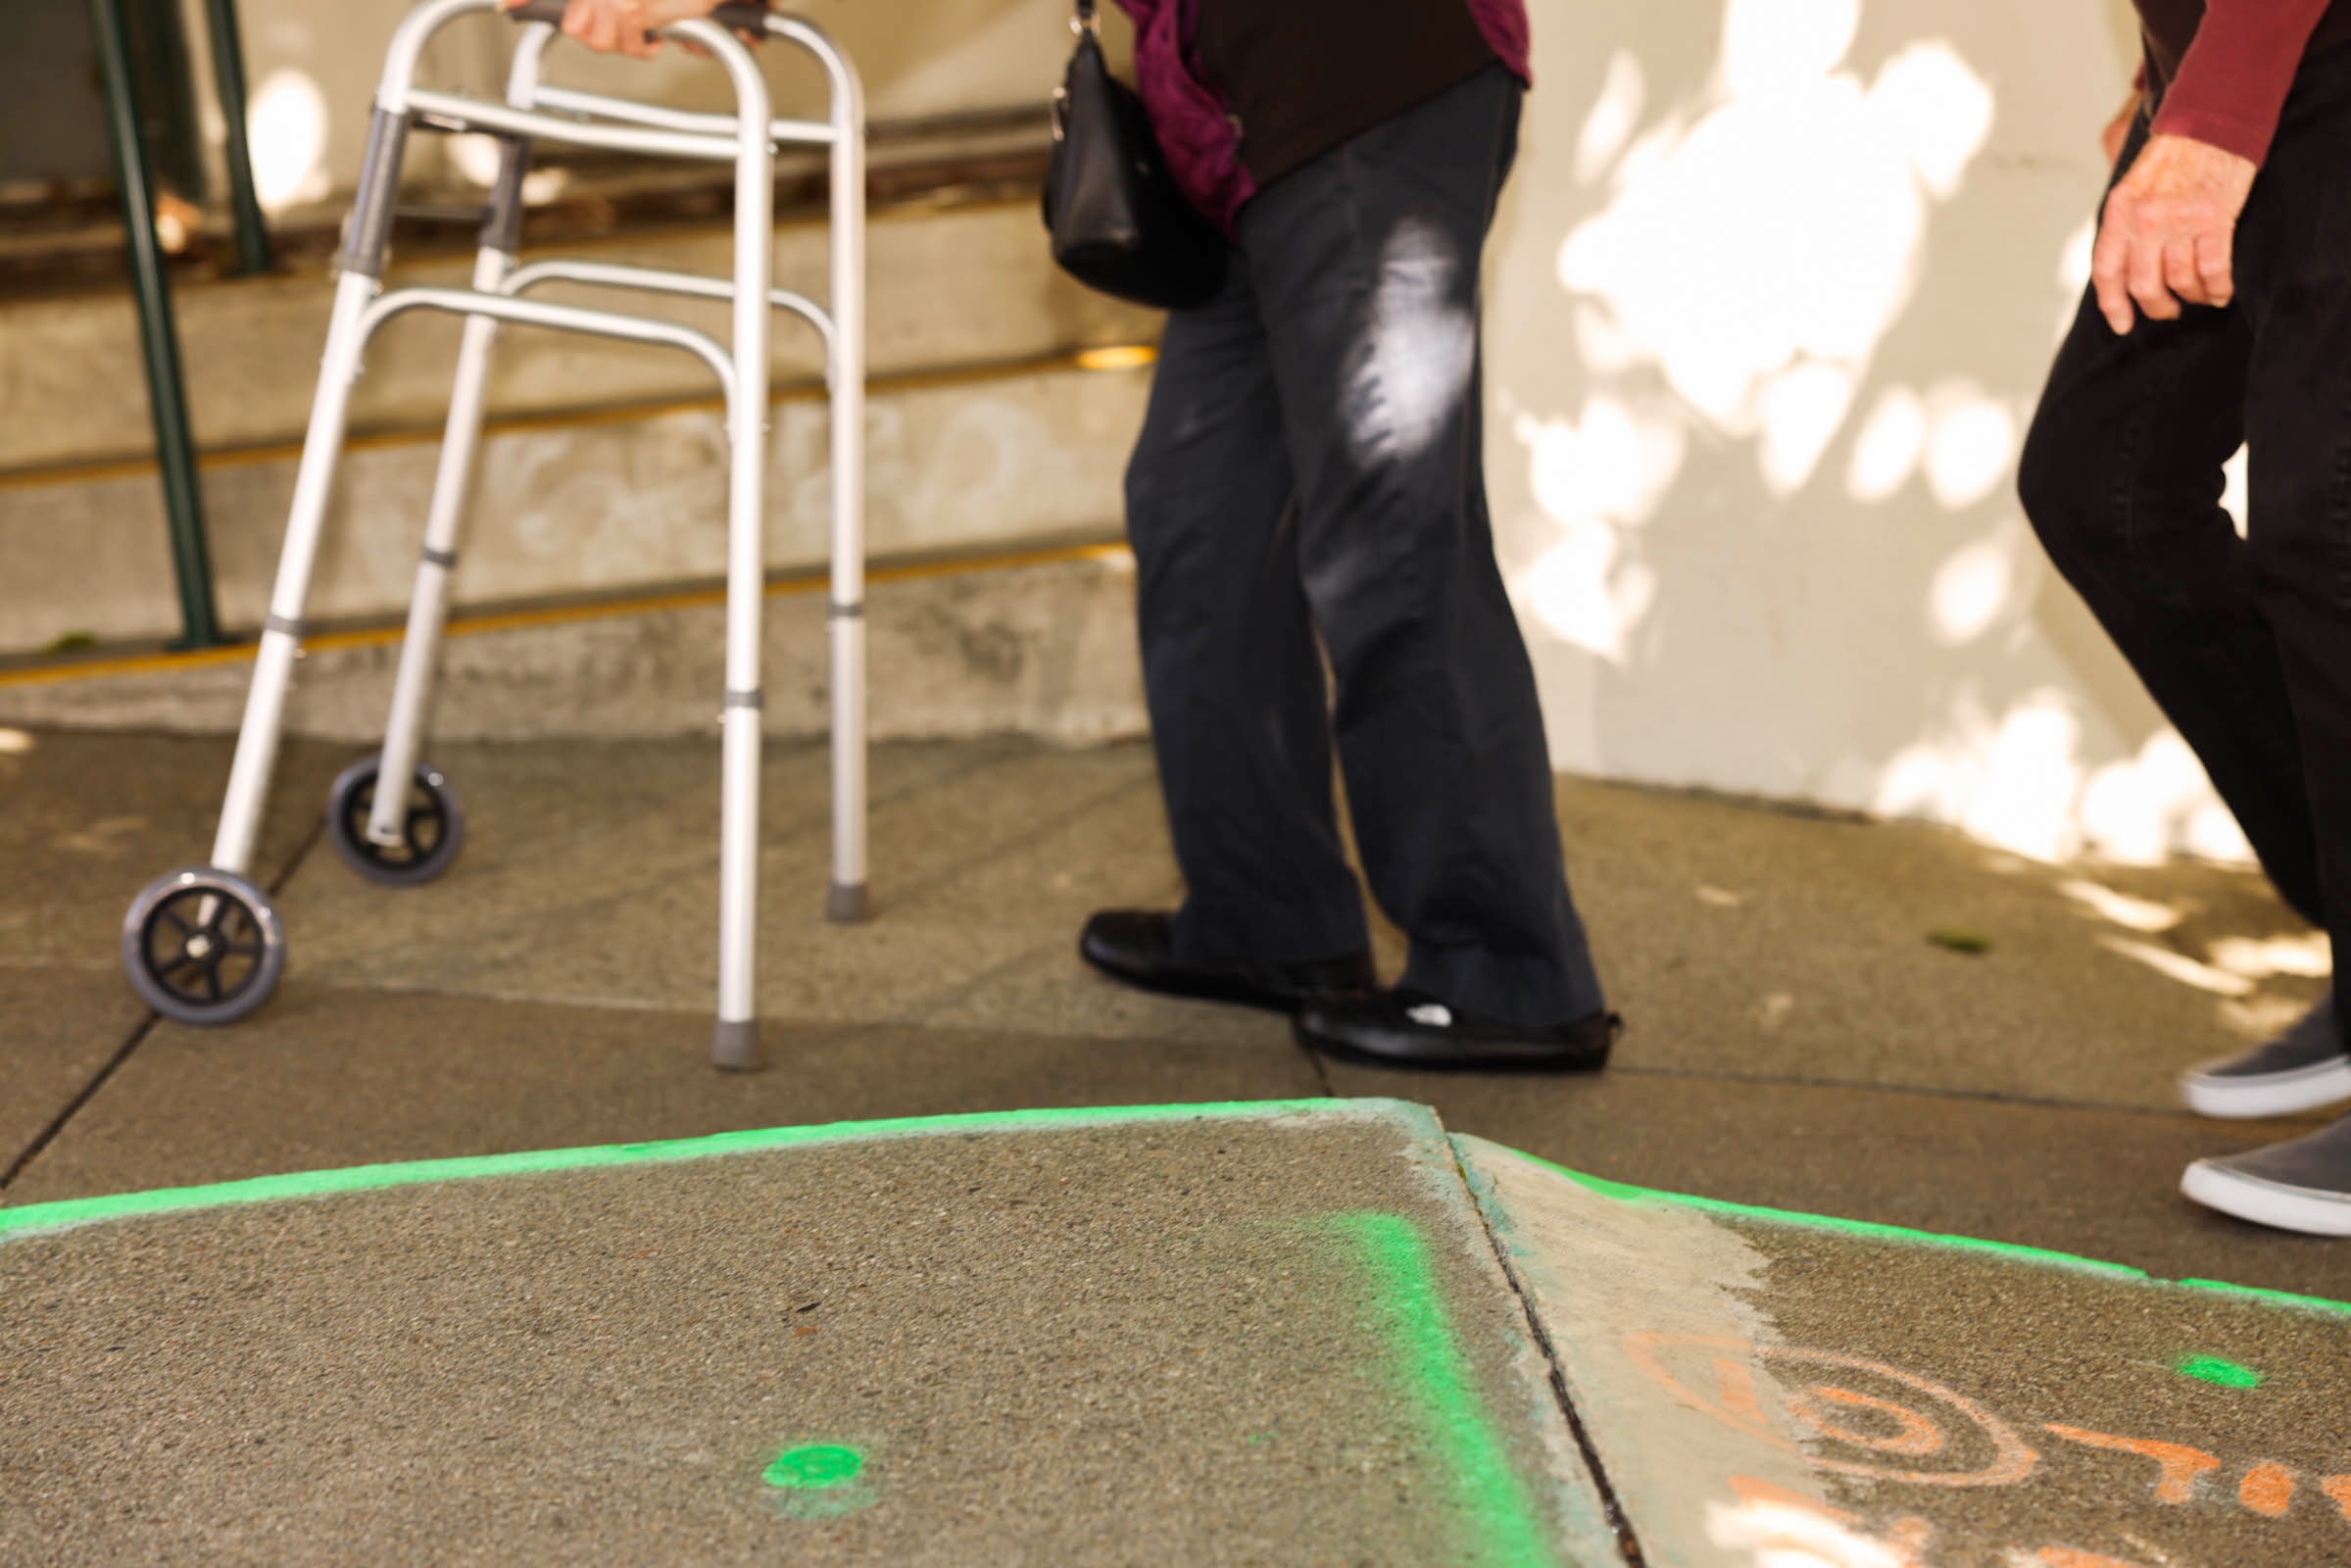 An elderly person uses a walker on a sidewalk ramp, accompanied by someone. The concrete is marked with green and orange paint, and stairs are in the background.